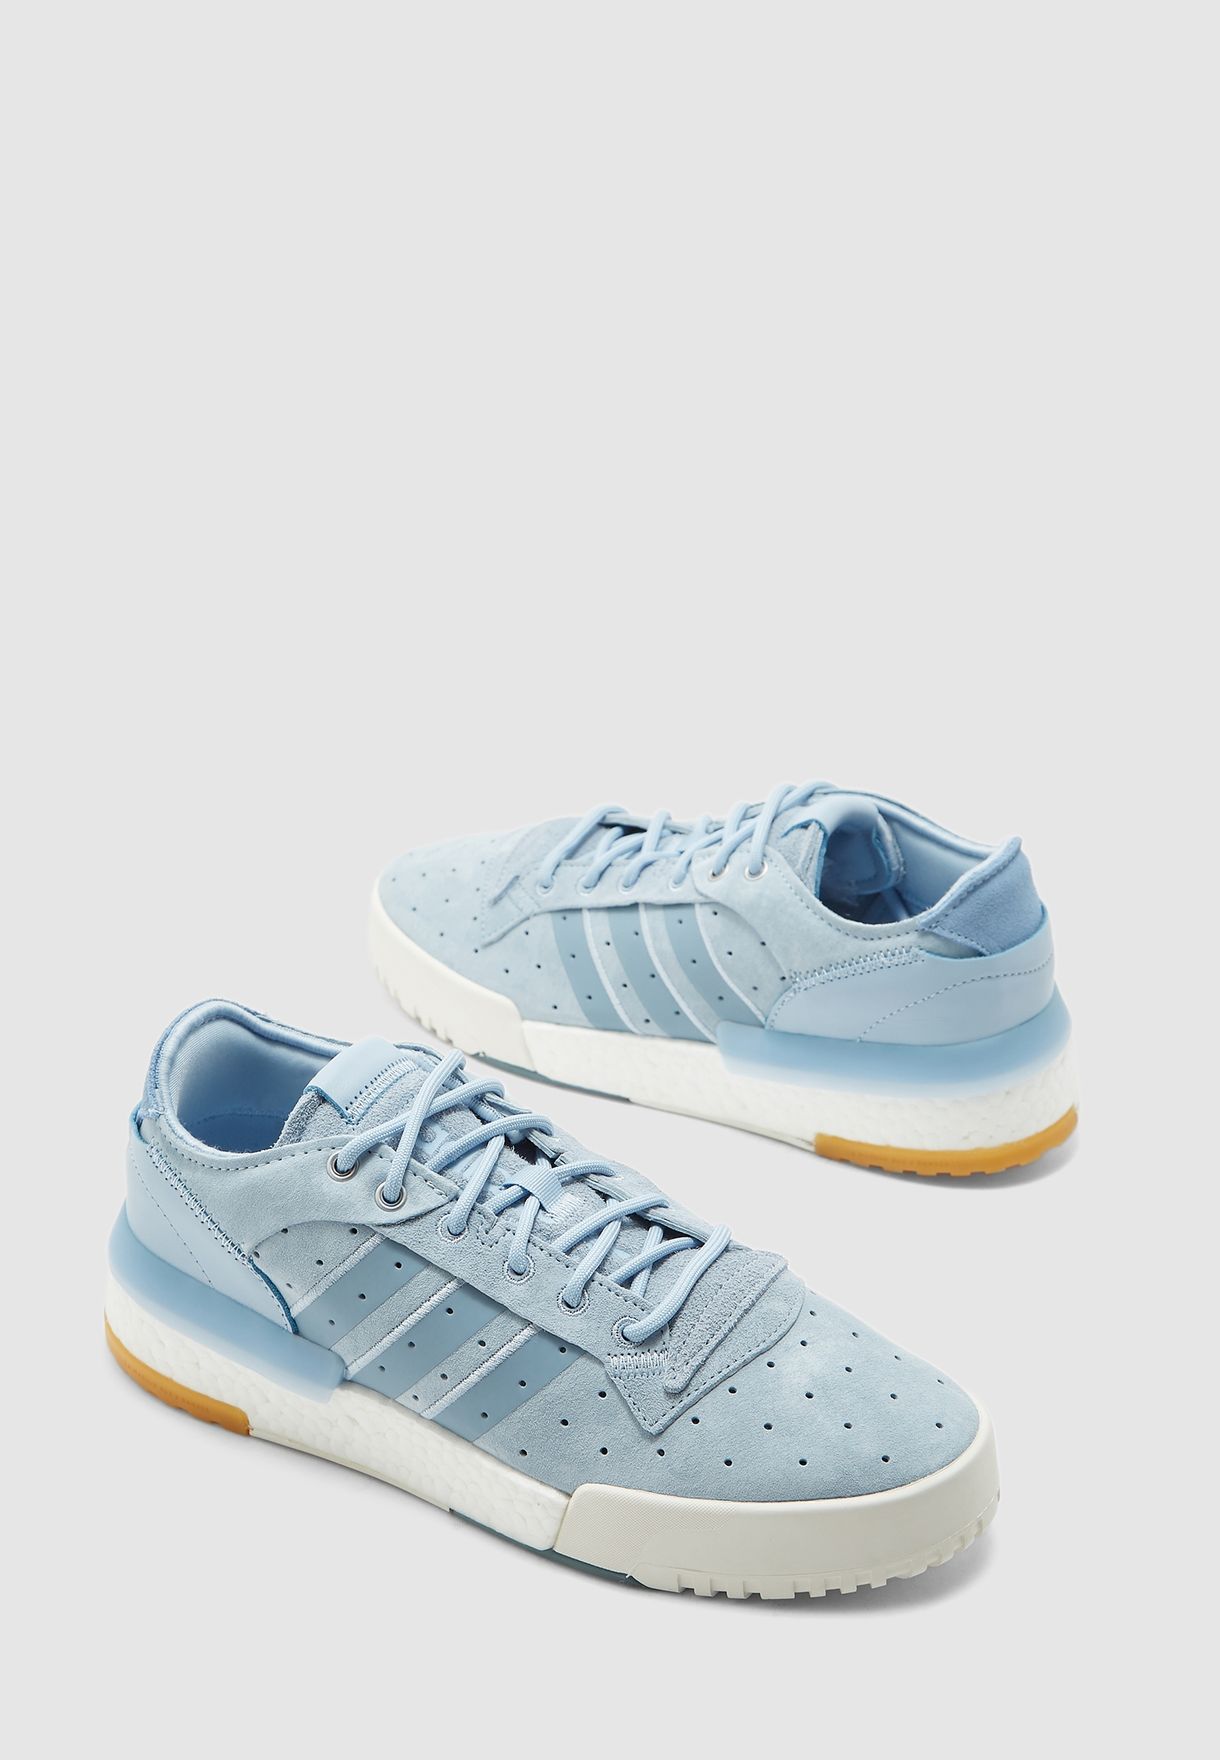 adidas rivalry rm low blue